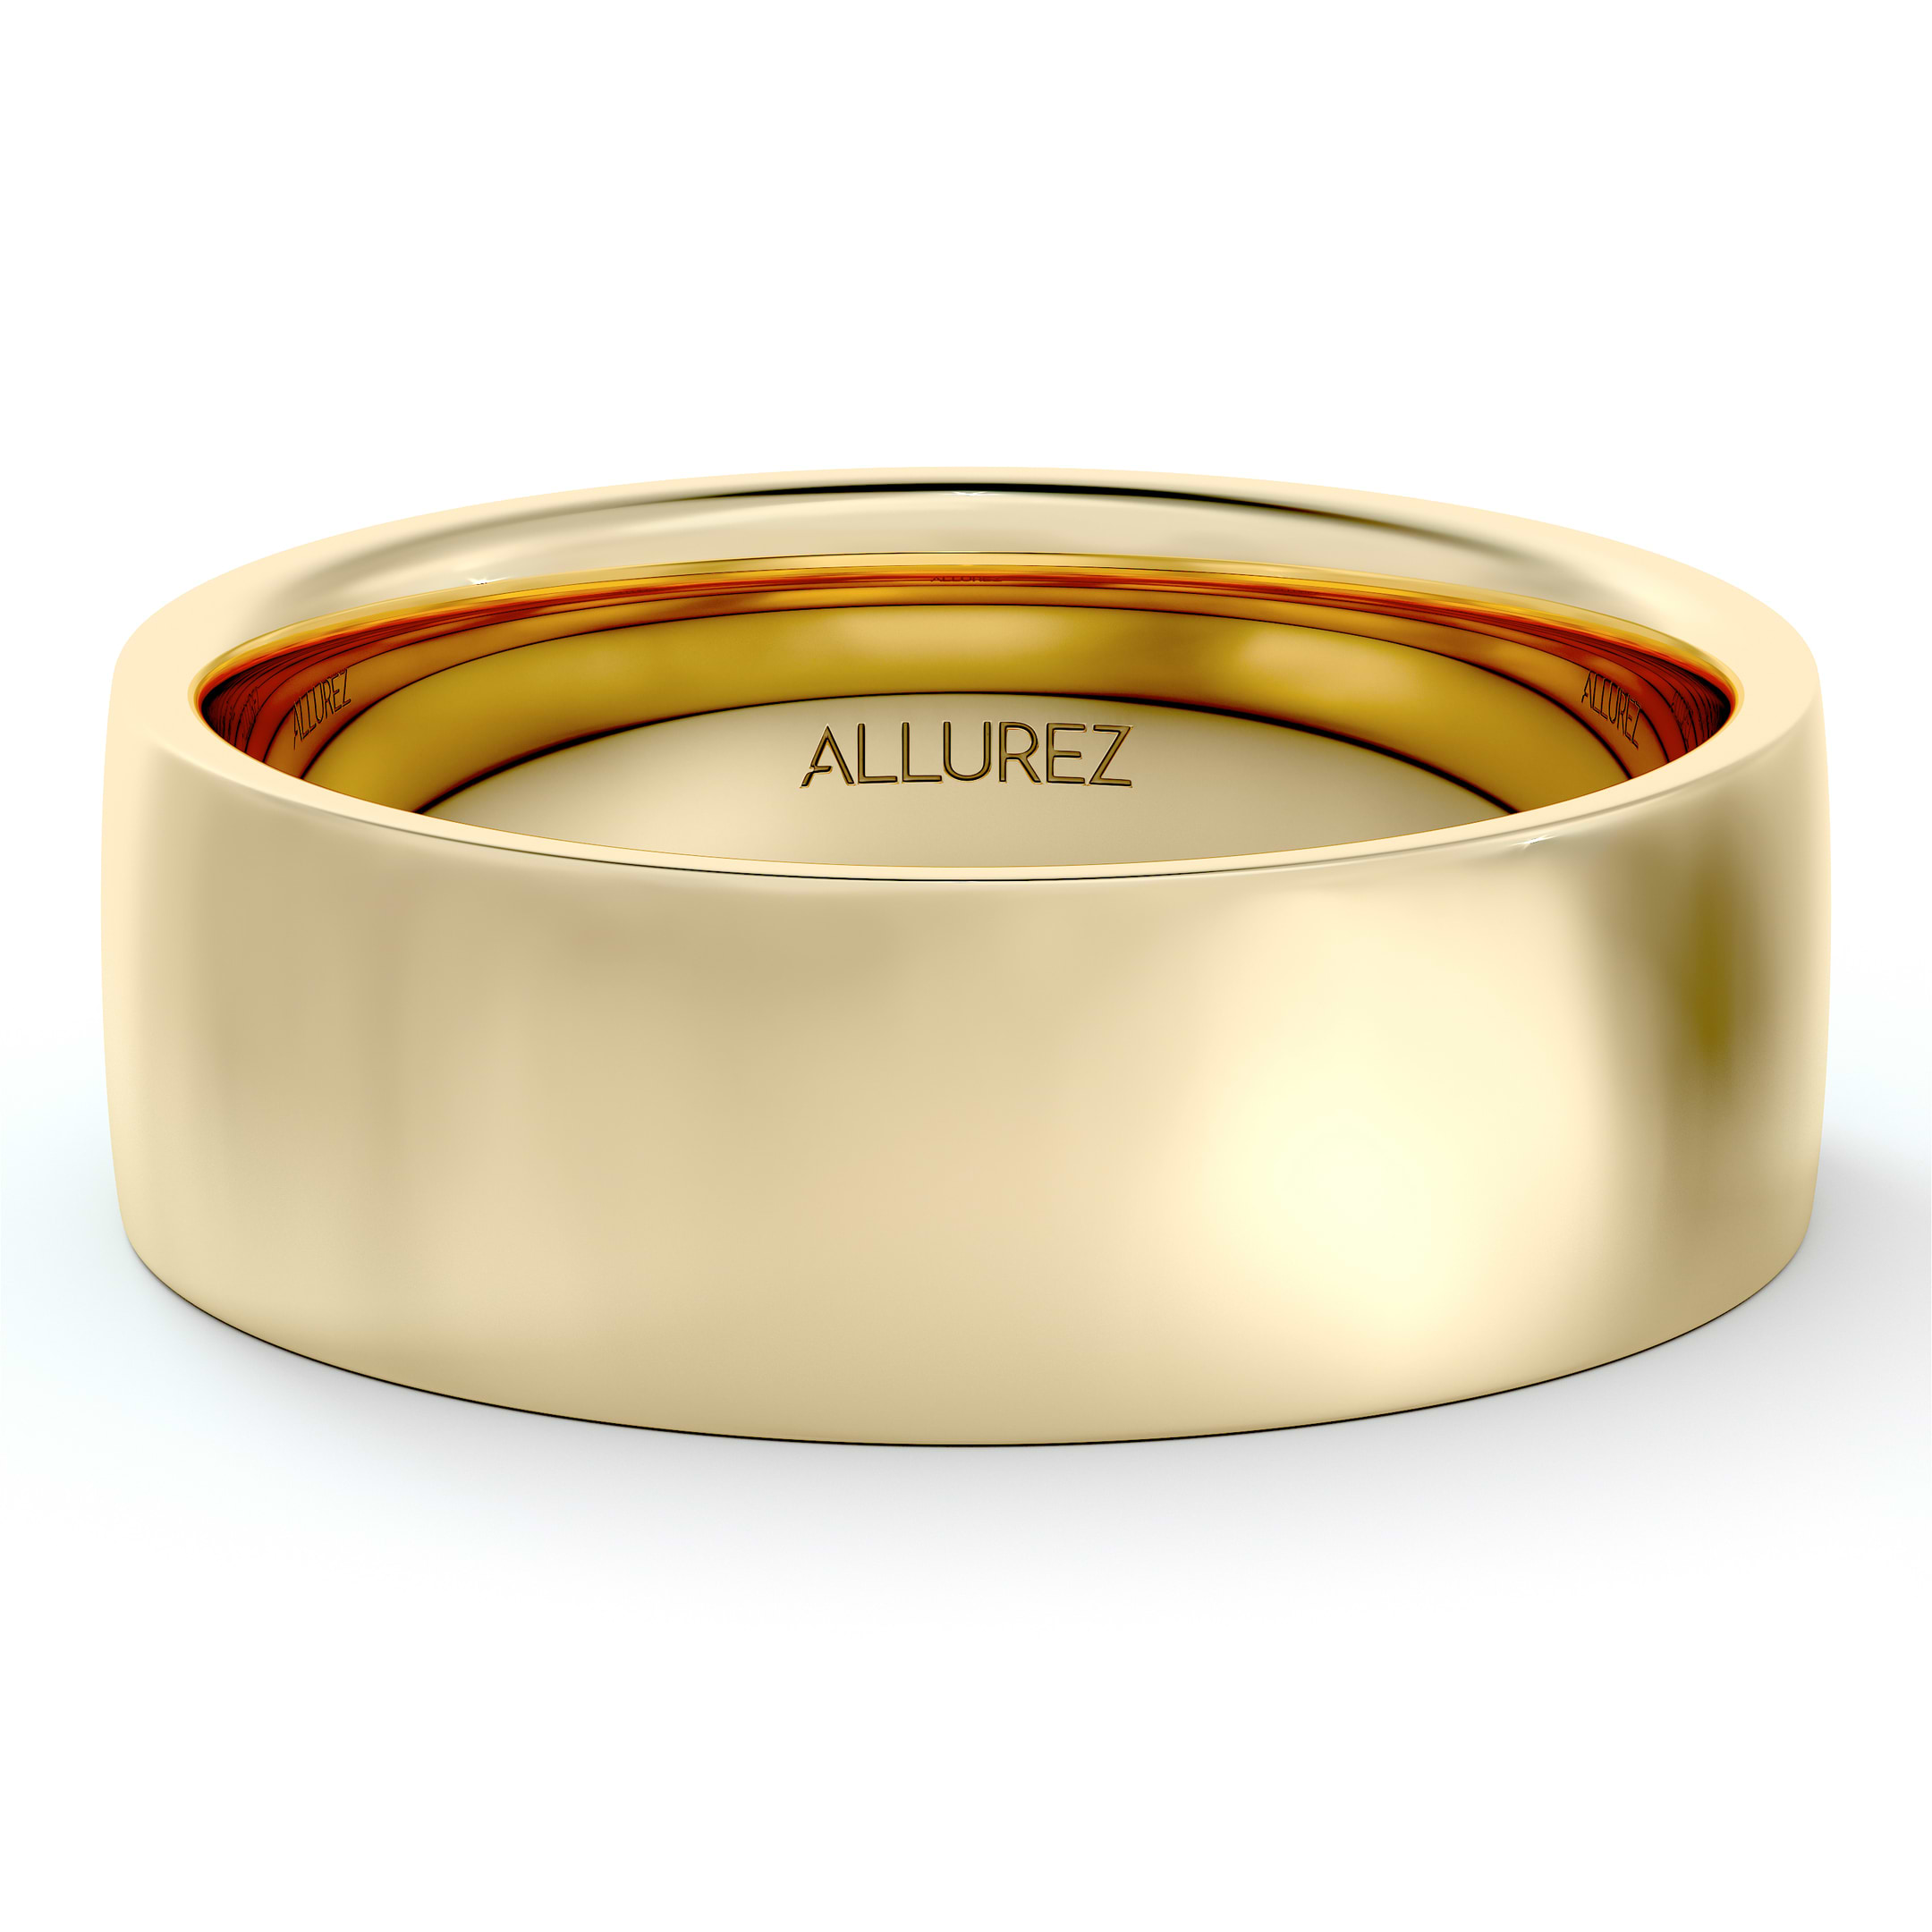 Men's Wedding Ring Low Dome Comfort-Fit in 18k Yellow Gold (6mm)